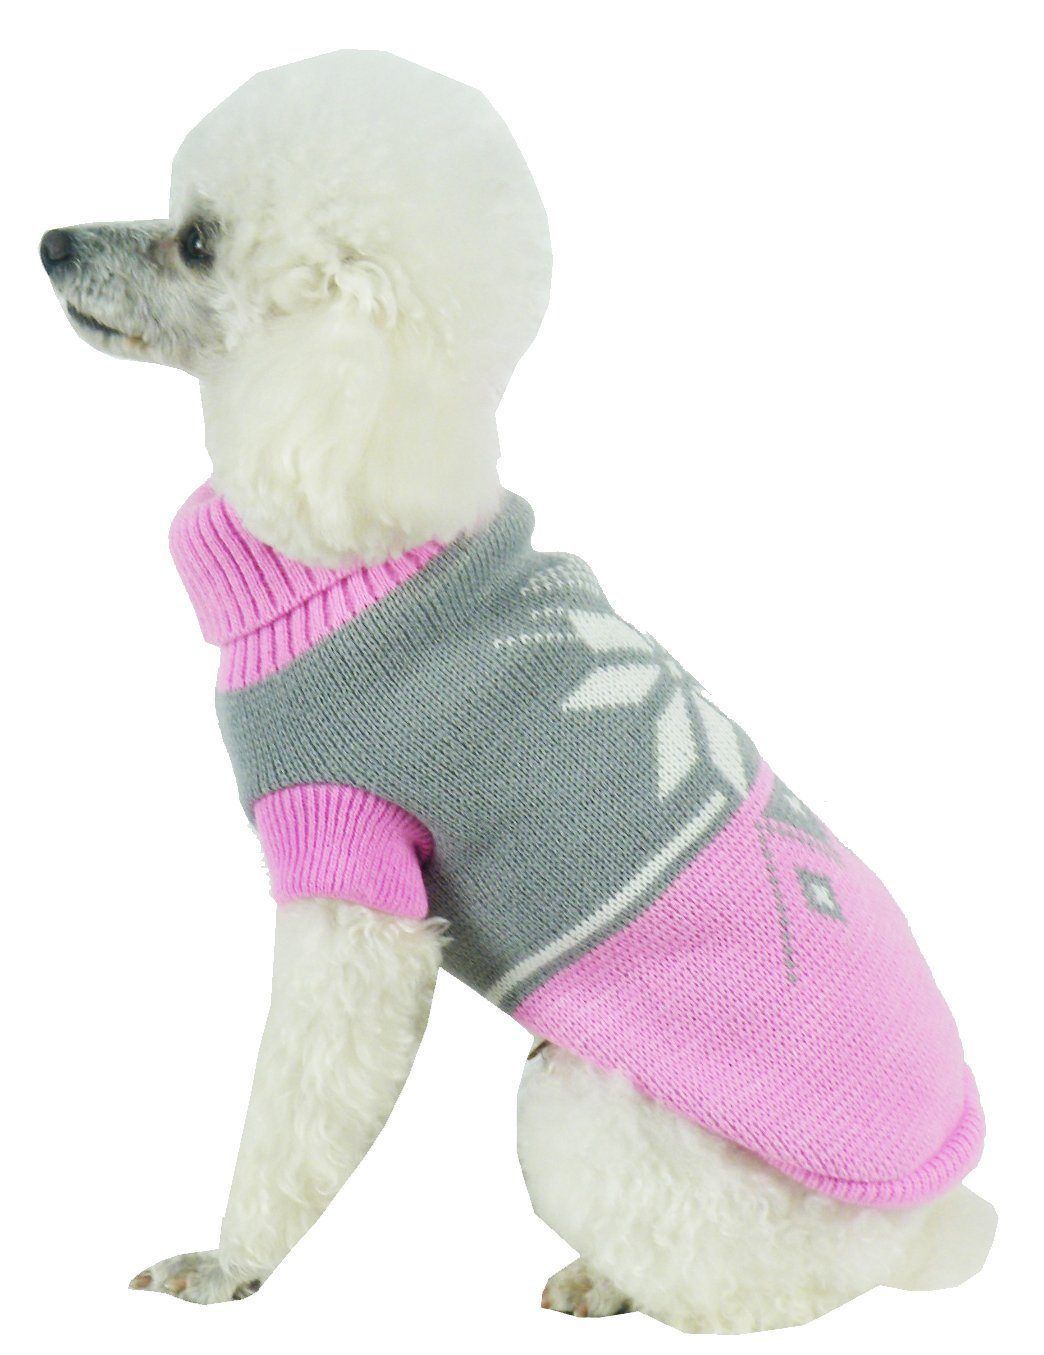 Pet Life ® Snow Flake Cable-Knitted Ribbed Fashion Turtle Neck Dog Sweater  